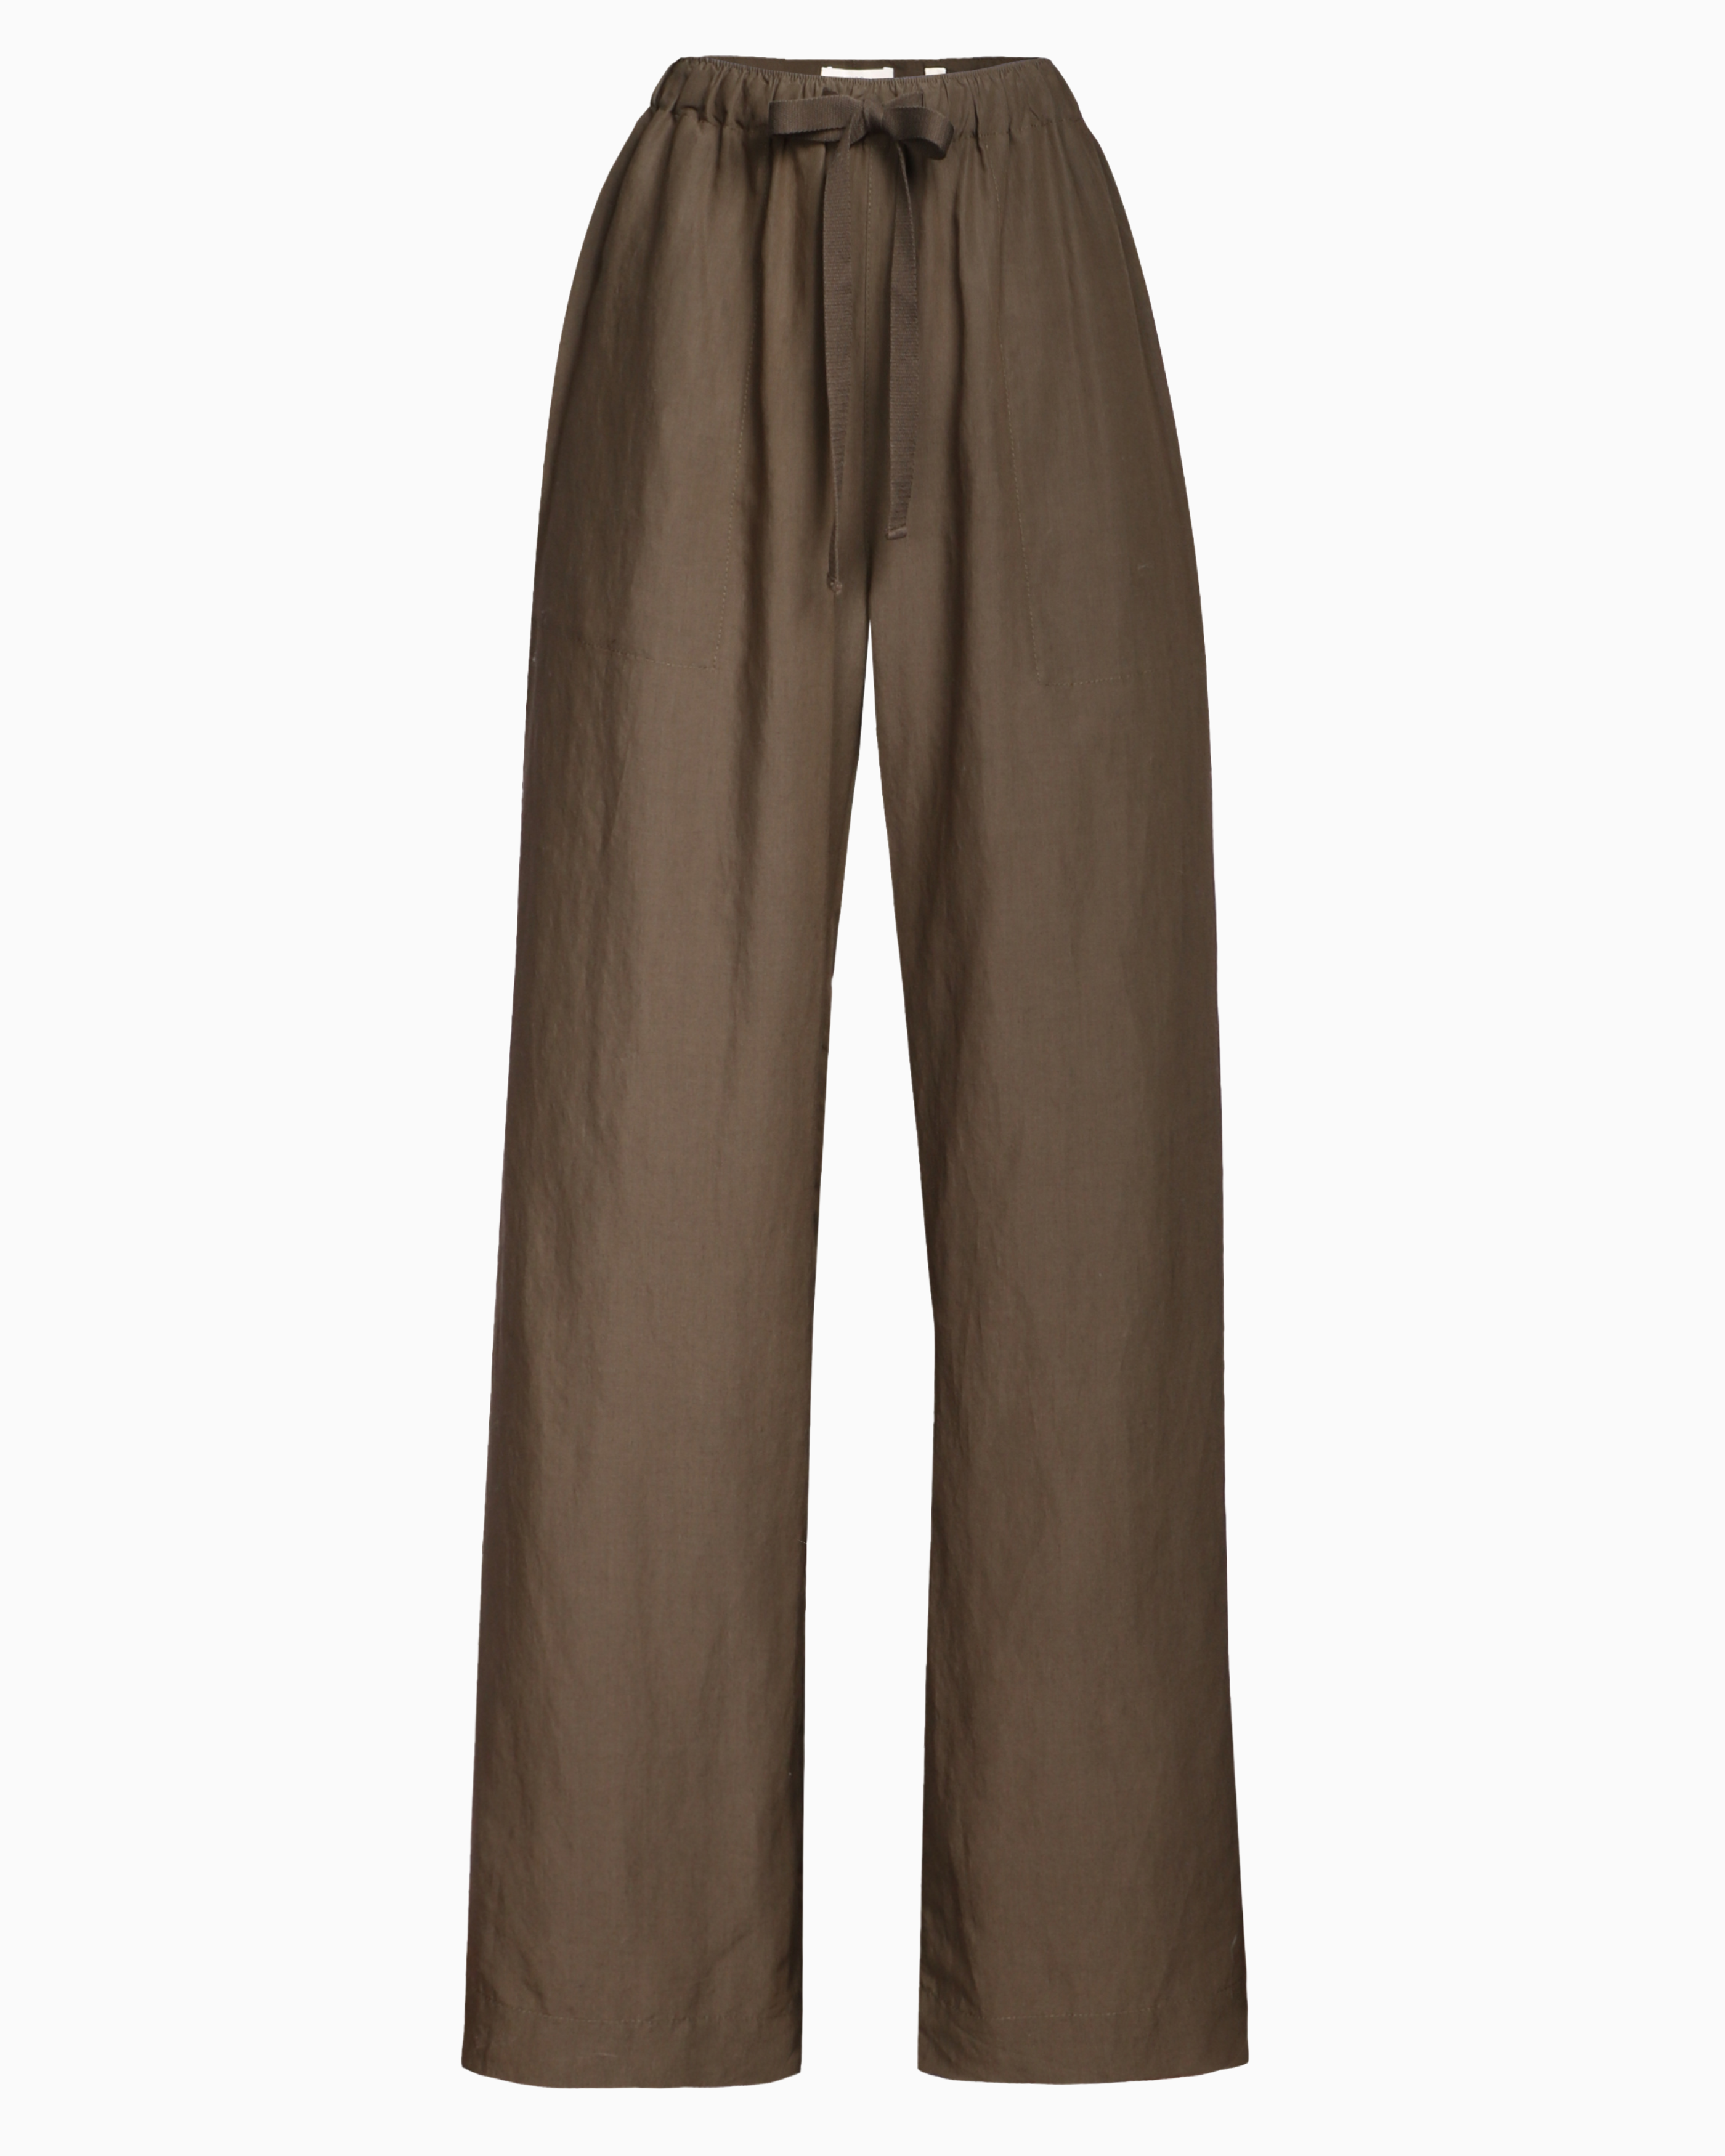 Vince Mid Rise Utility Drawstring Pant in Eden